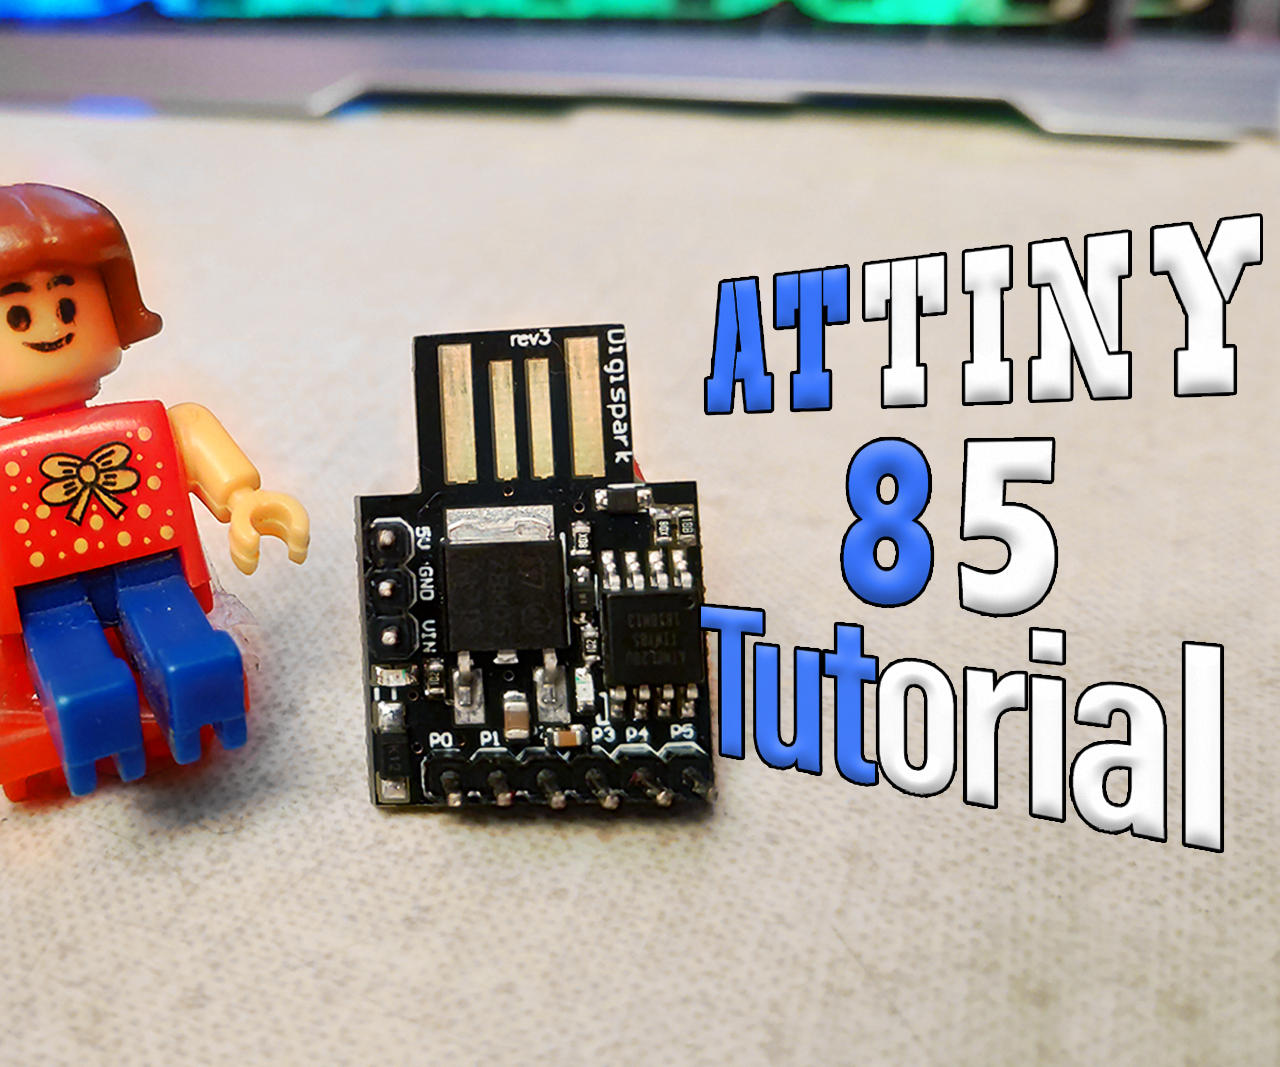 ATtiny85 NanoCurrent Meter with OLED - YouTube